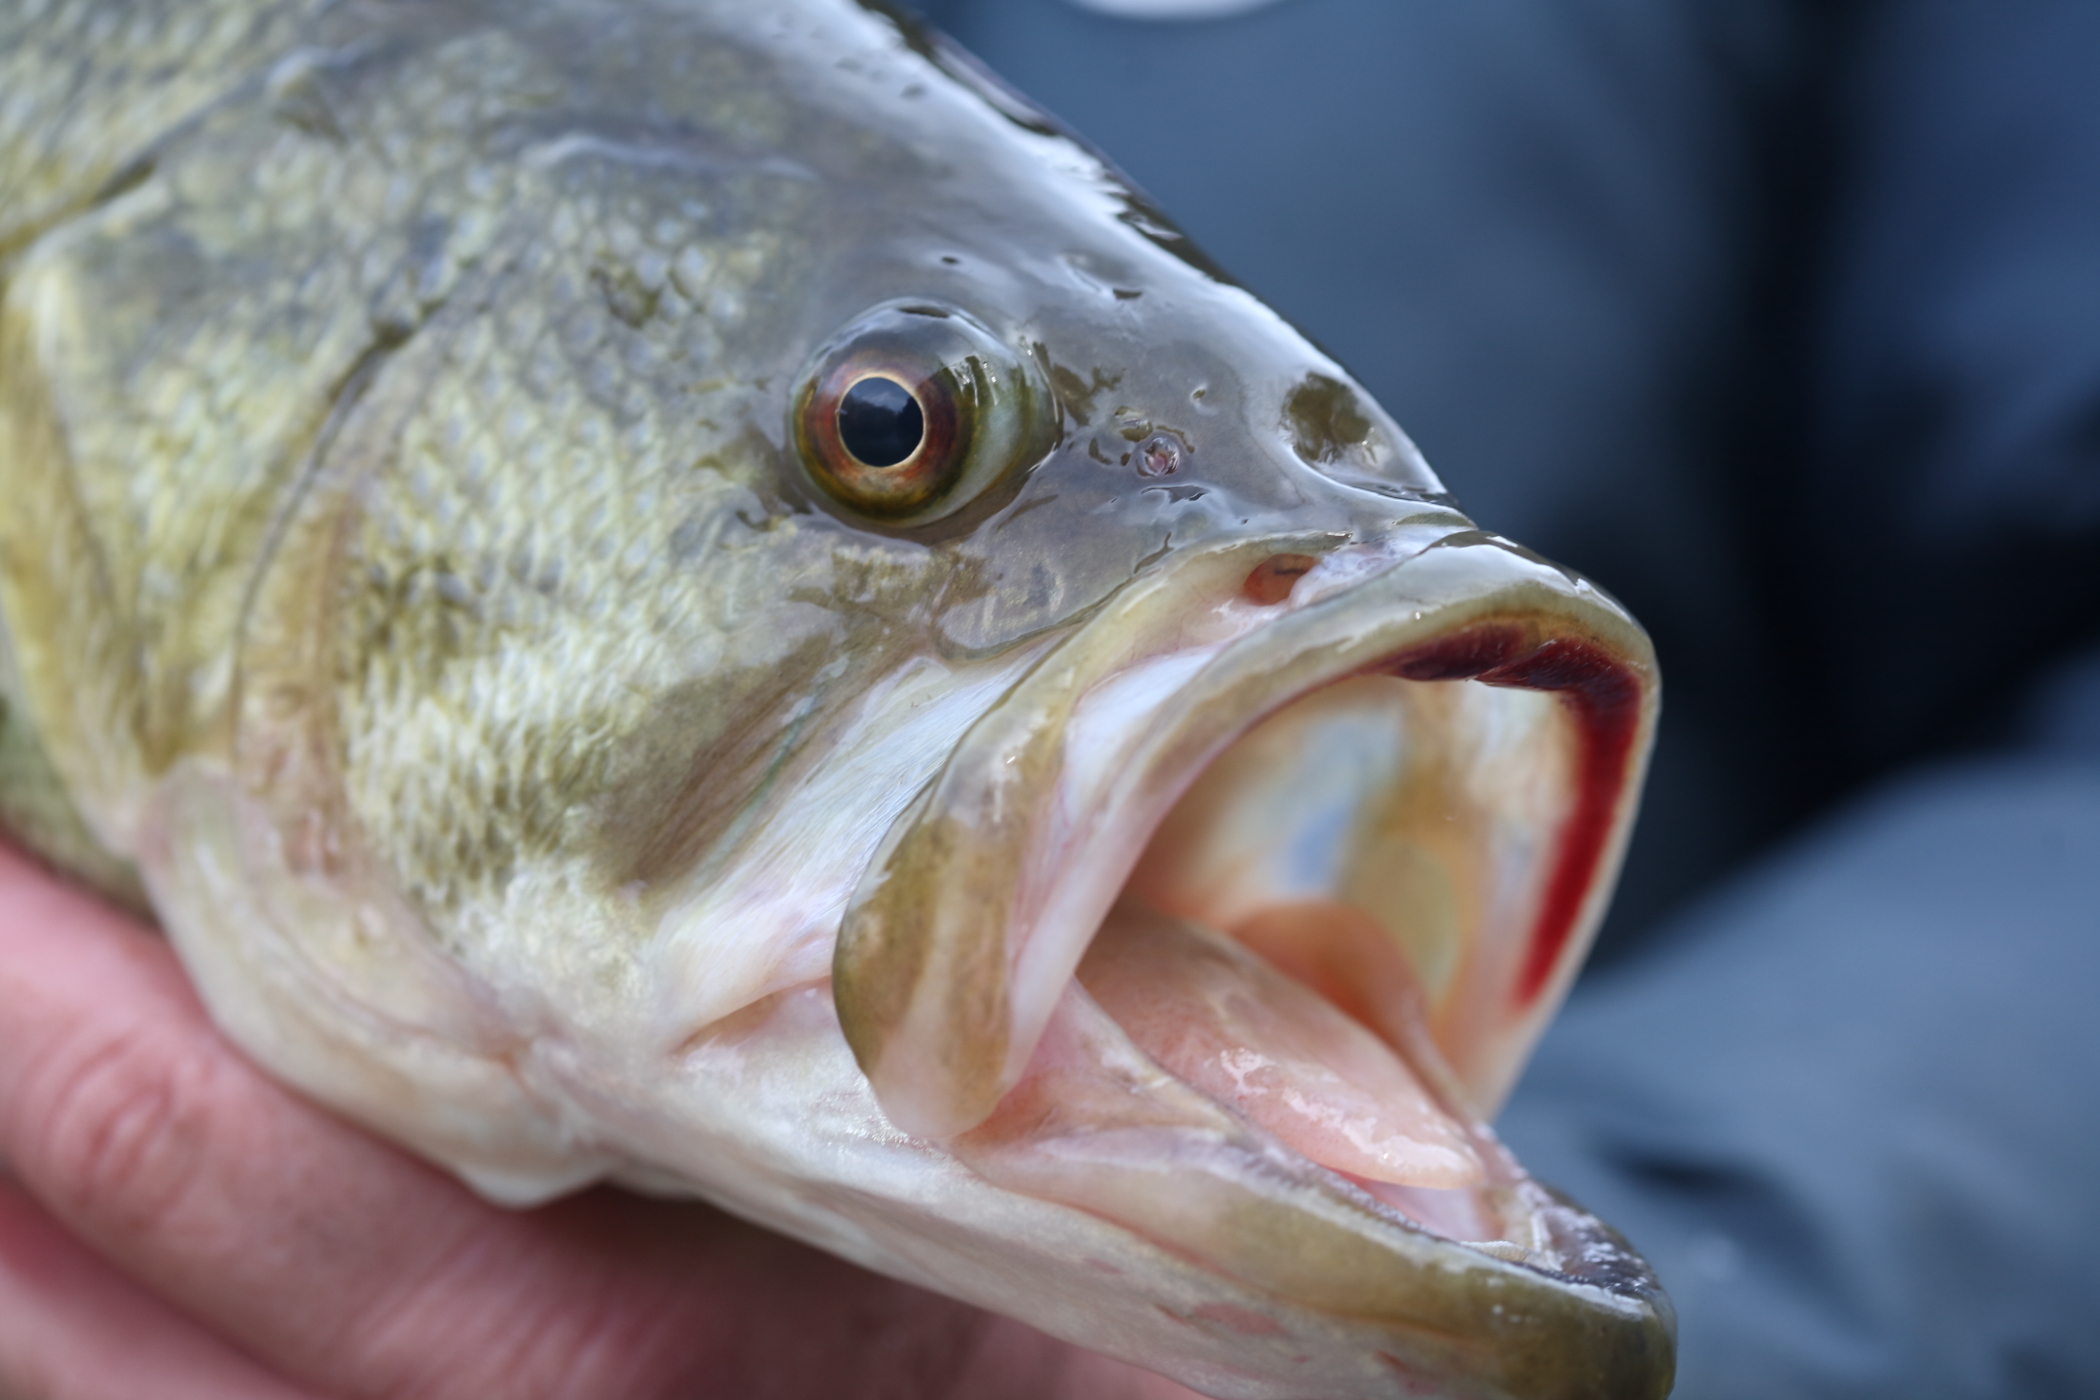 A large head of a bass being held in a hand